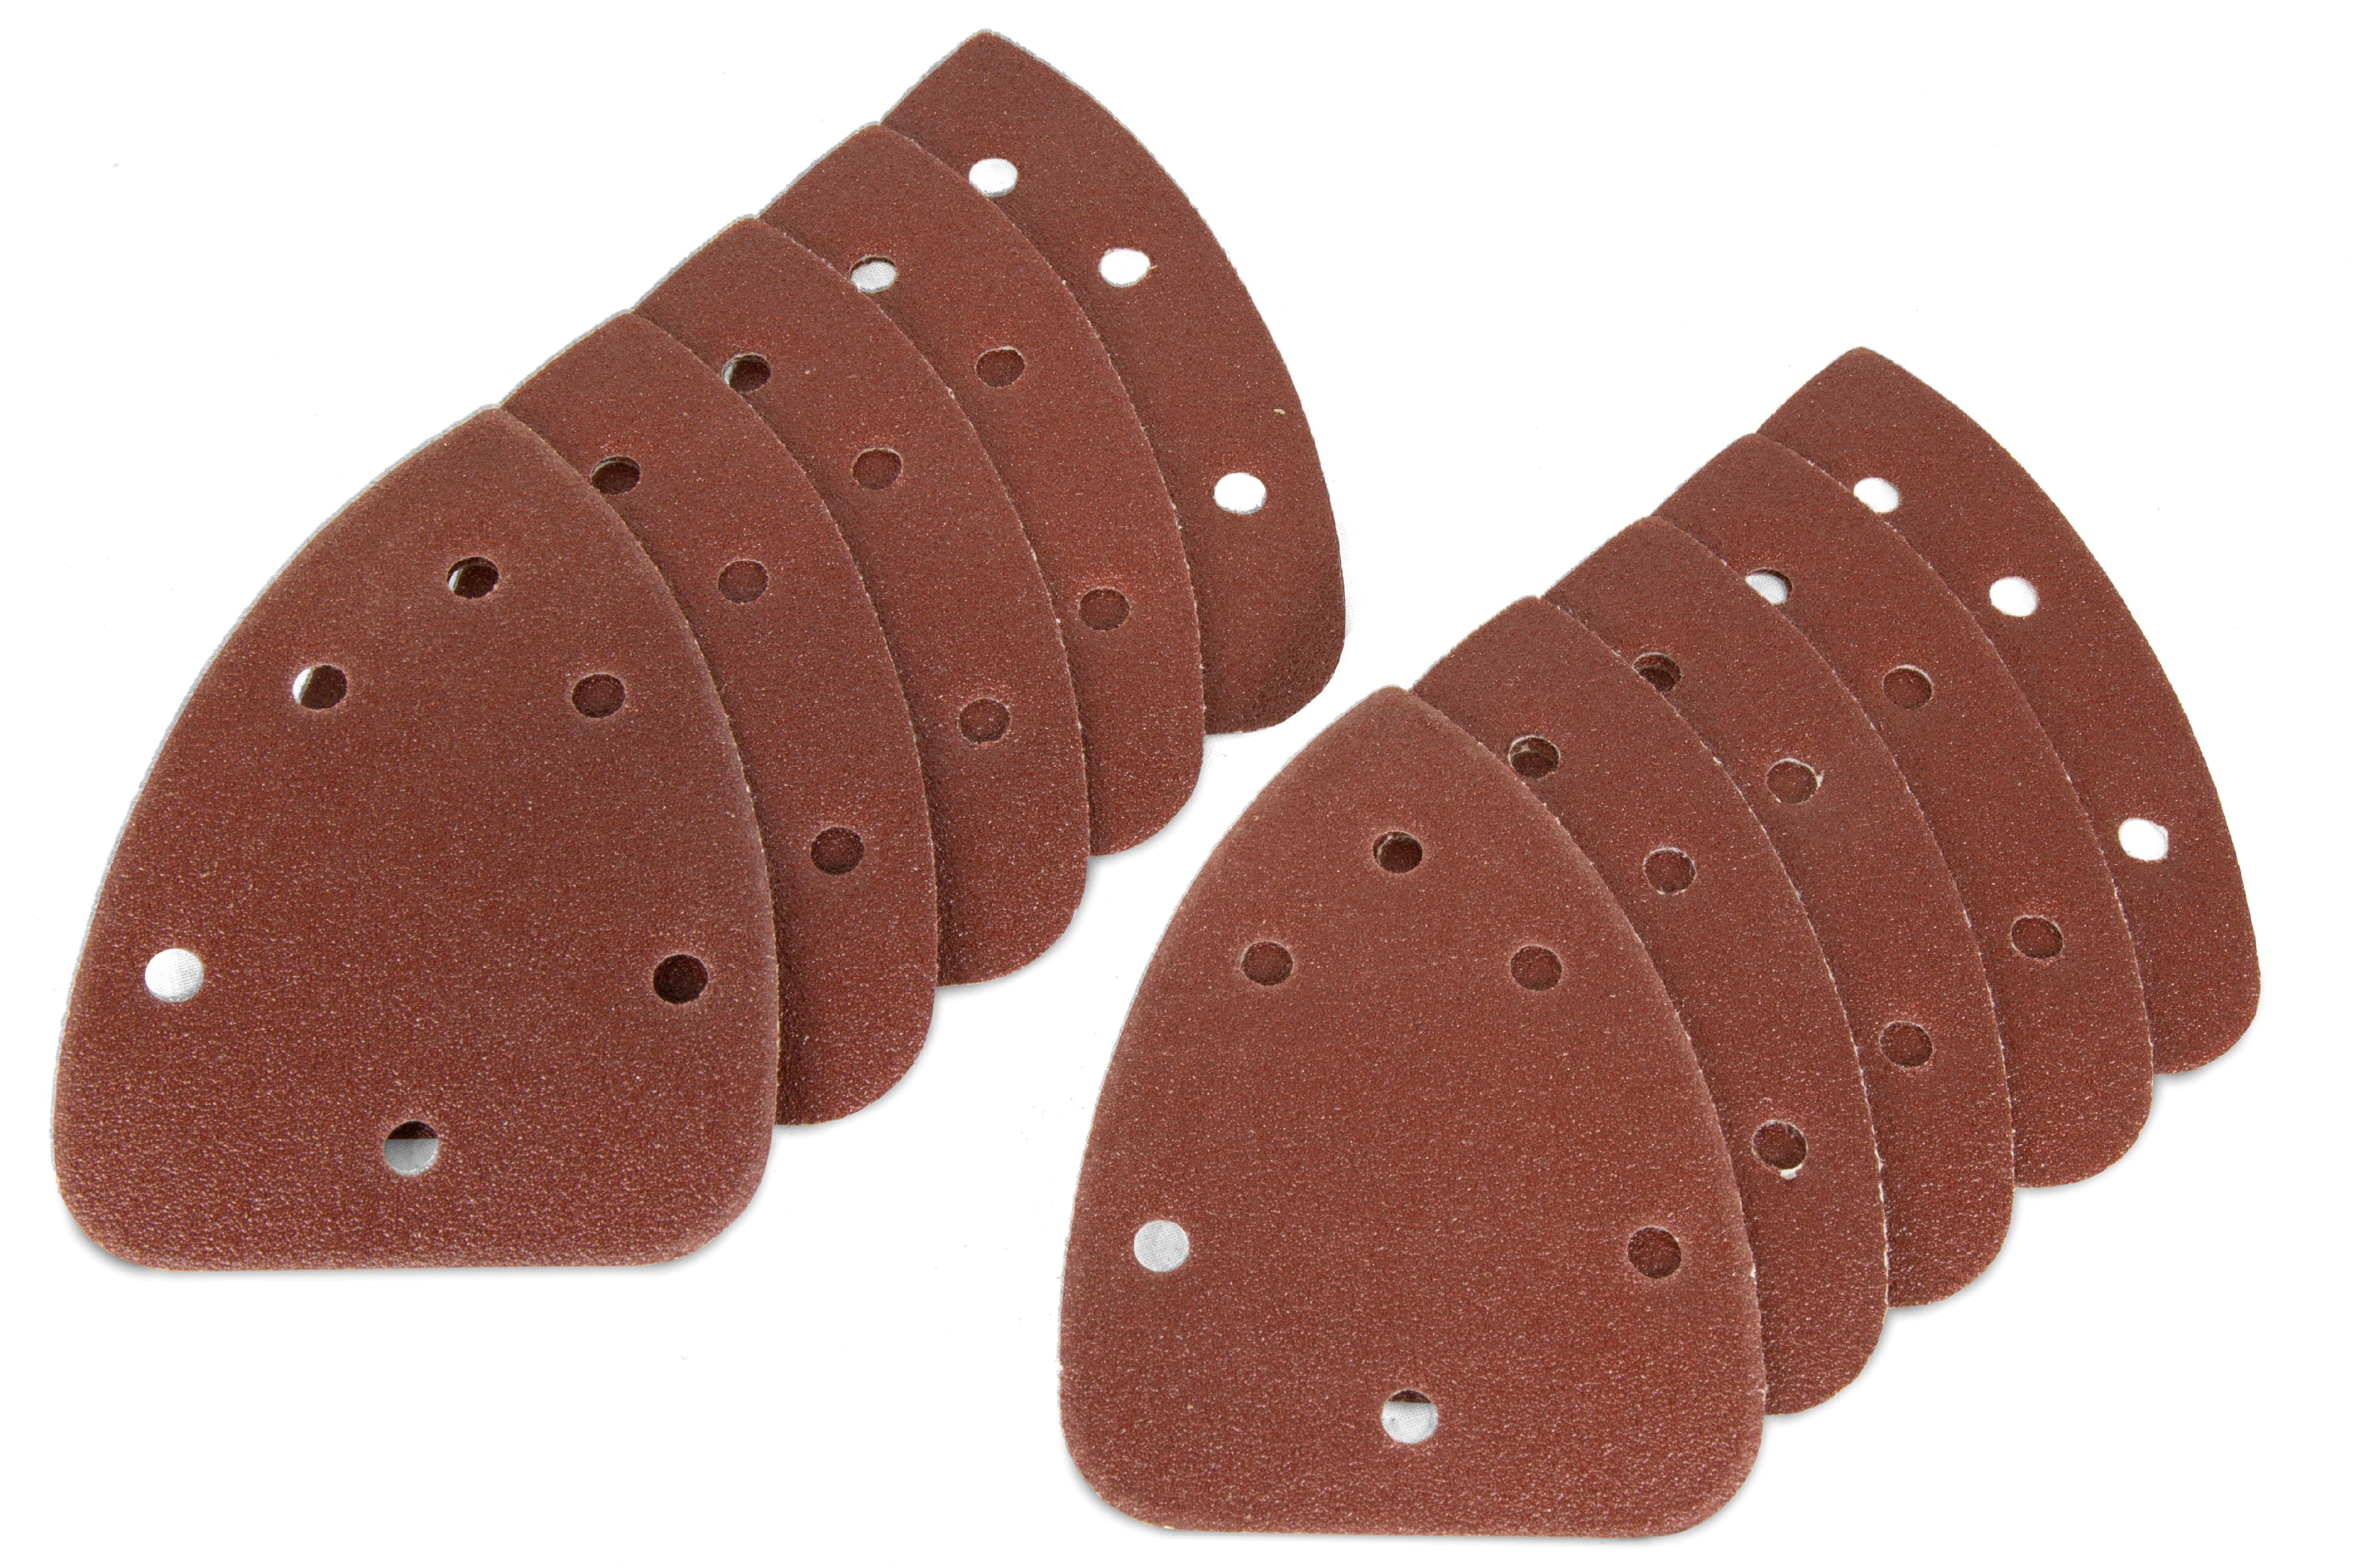 10 TRIANGLE SANDING PAD DELTA MIXED PALM MOUSE SANDER SAND PAPER SHEET 6 HOLES 